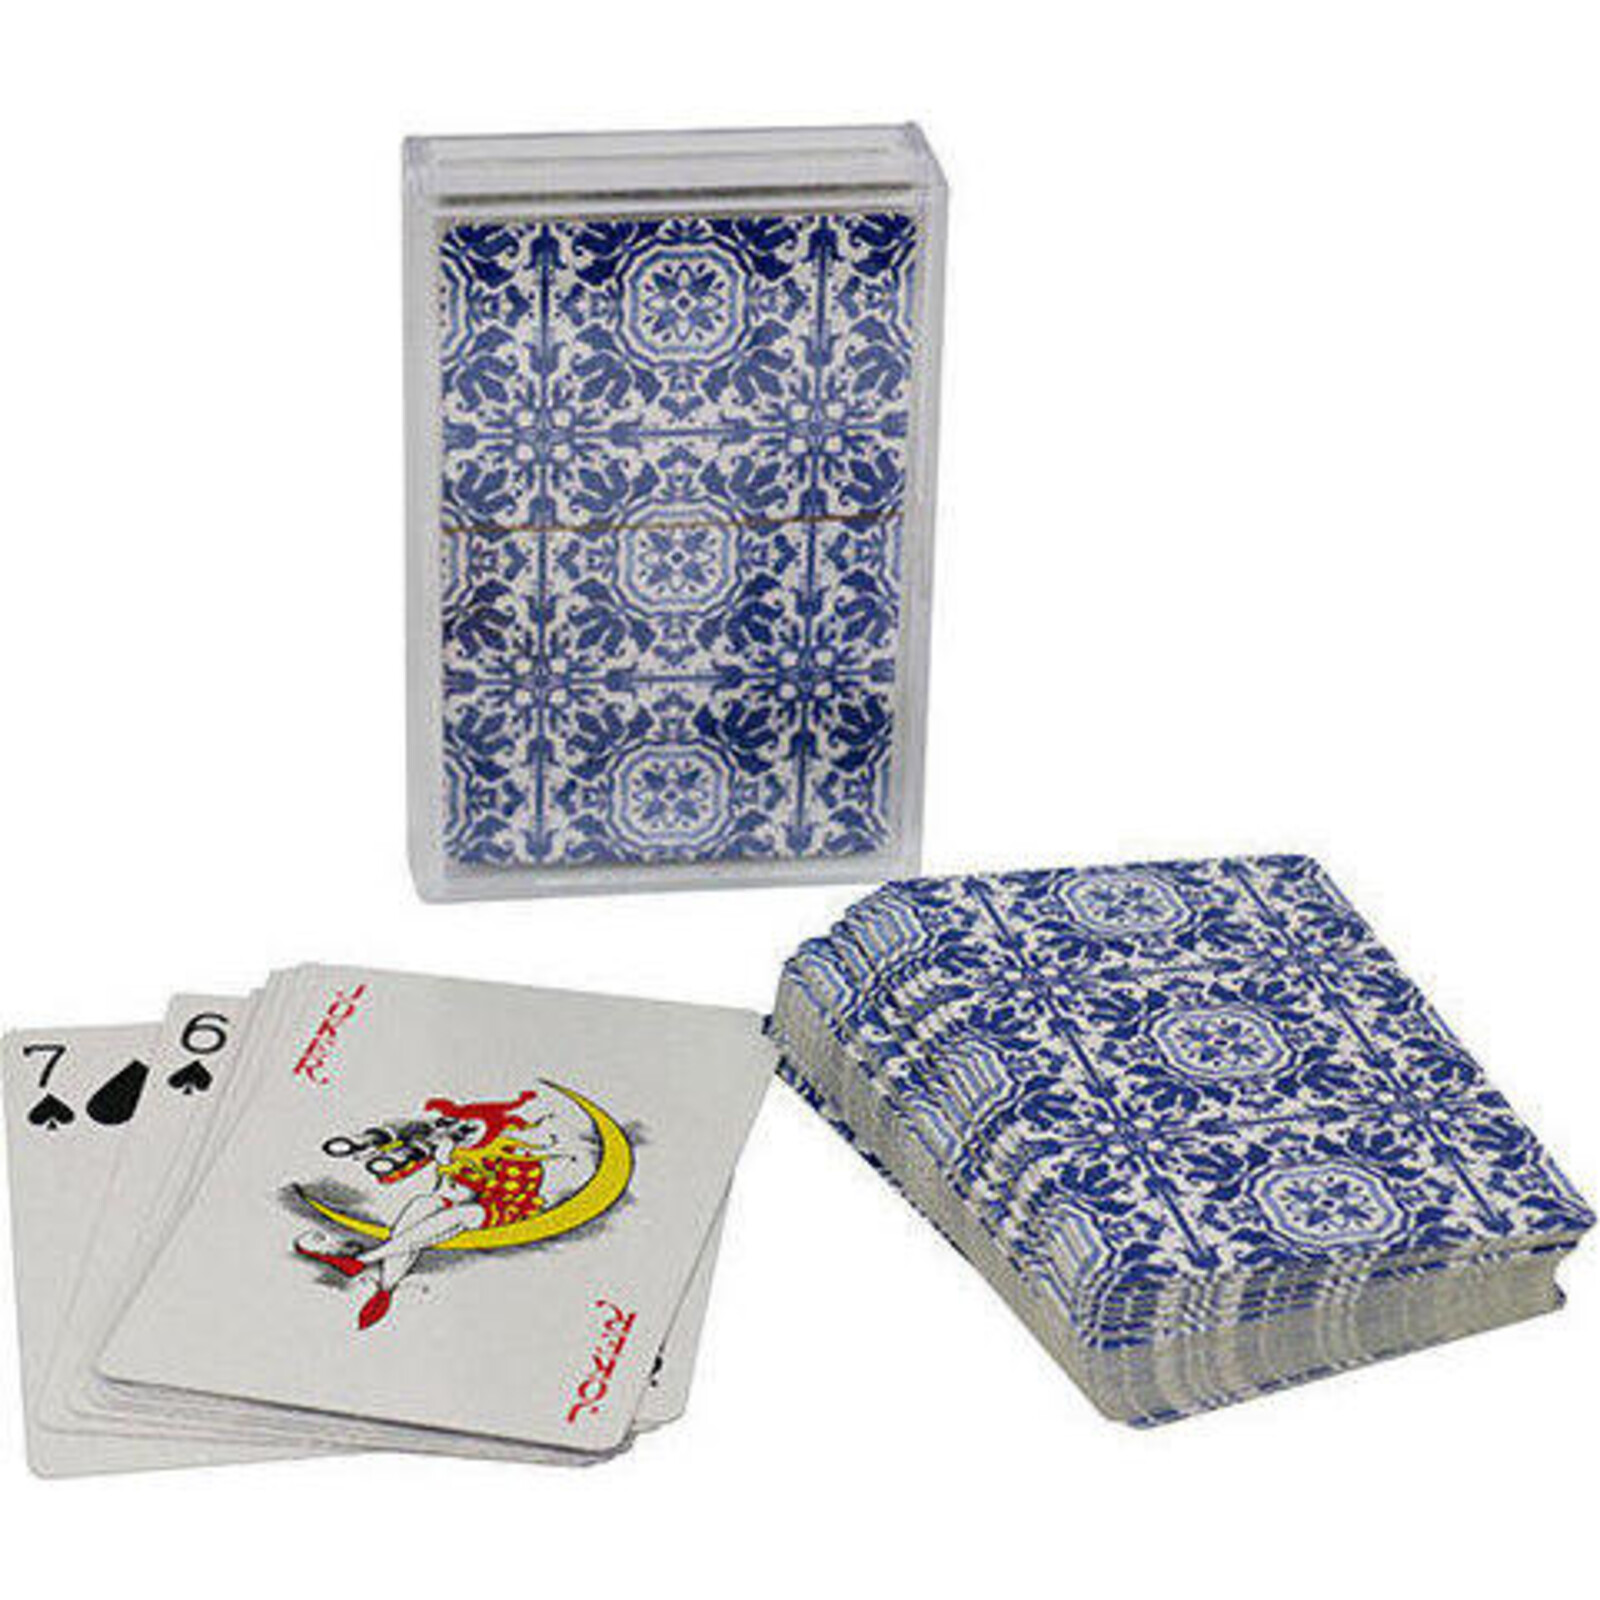  Playing Cards Moroccan Blue Tiles